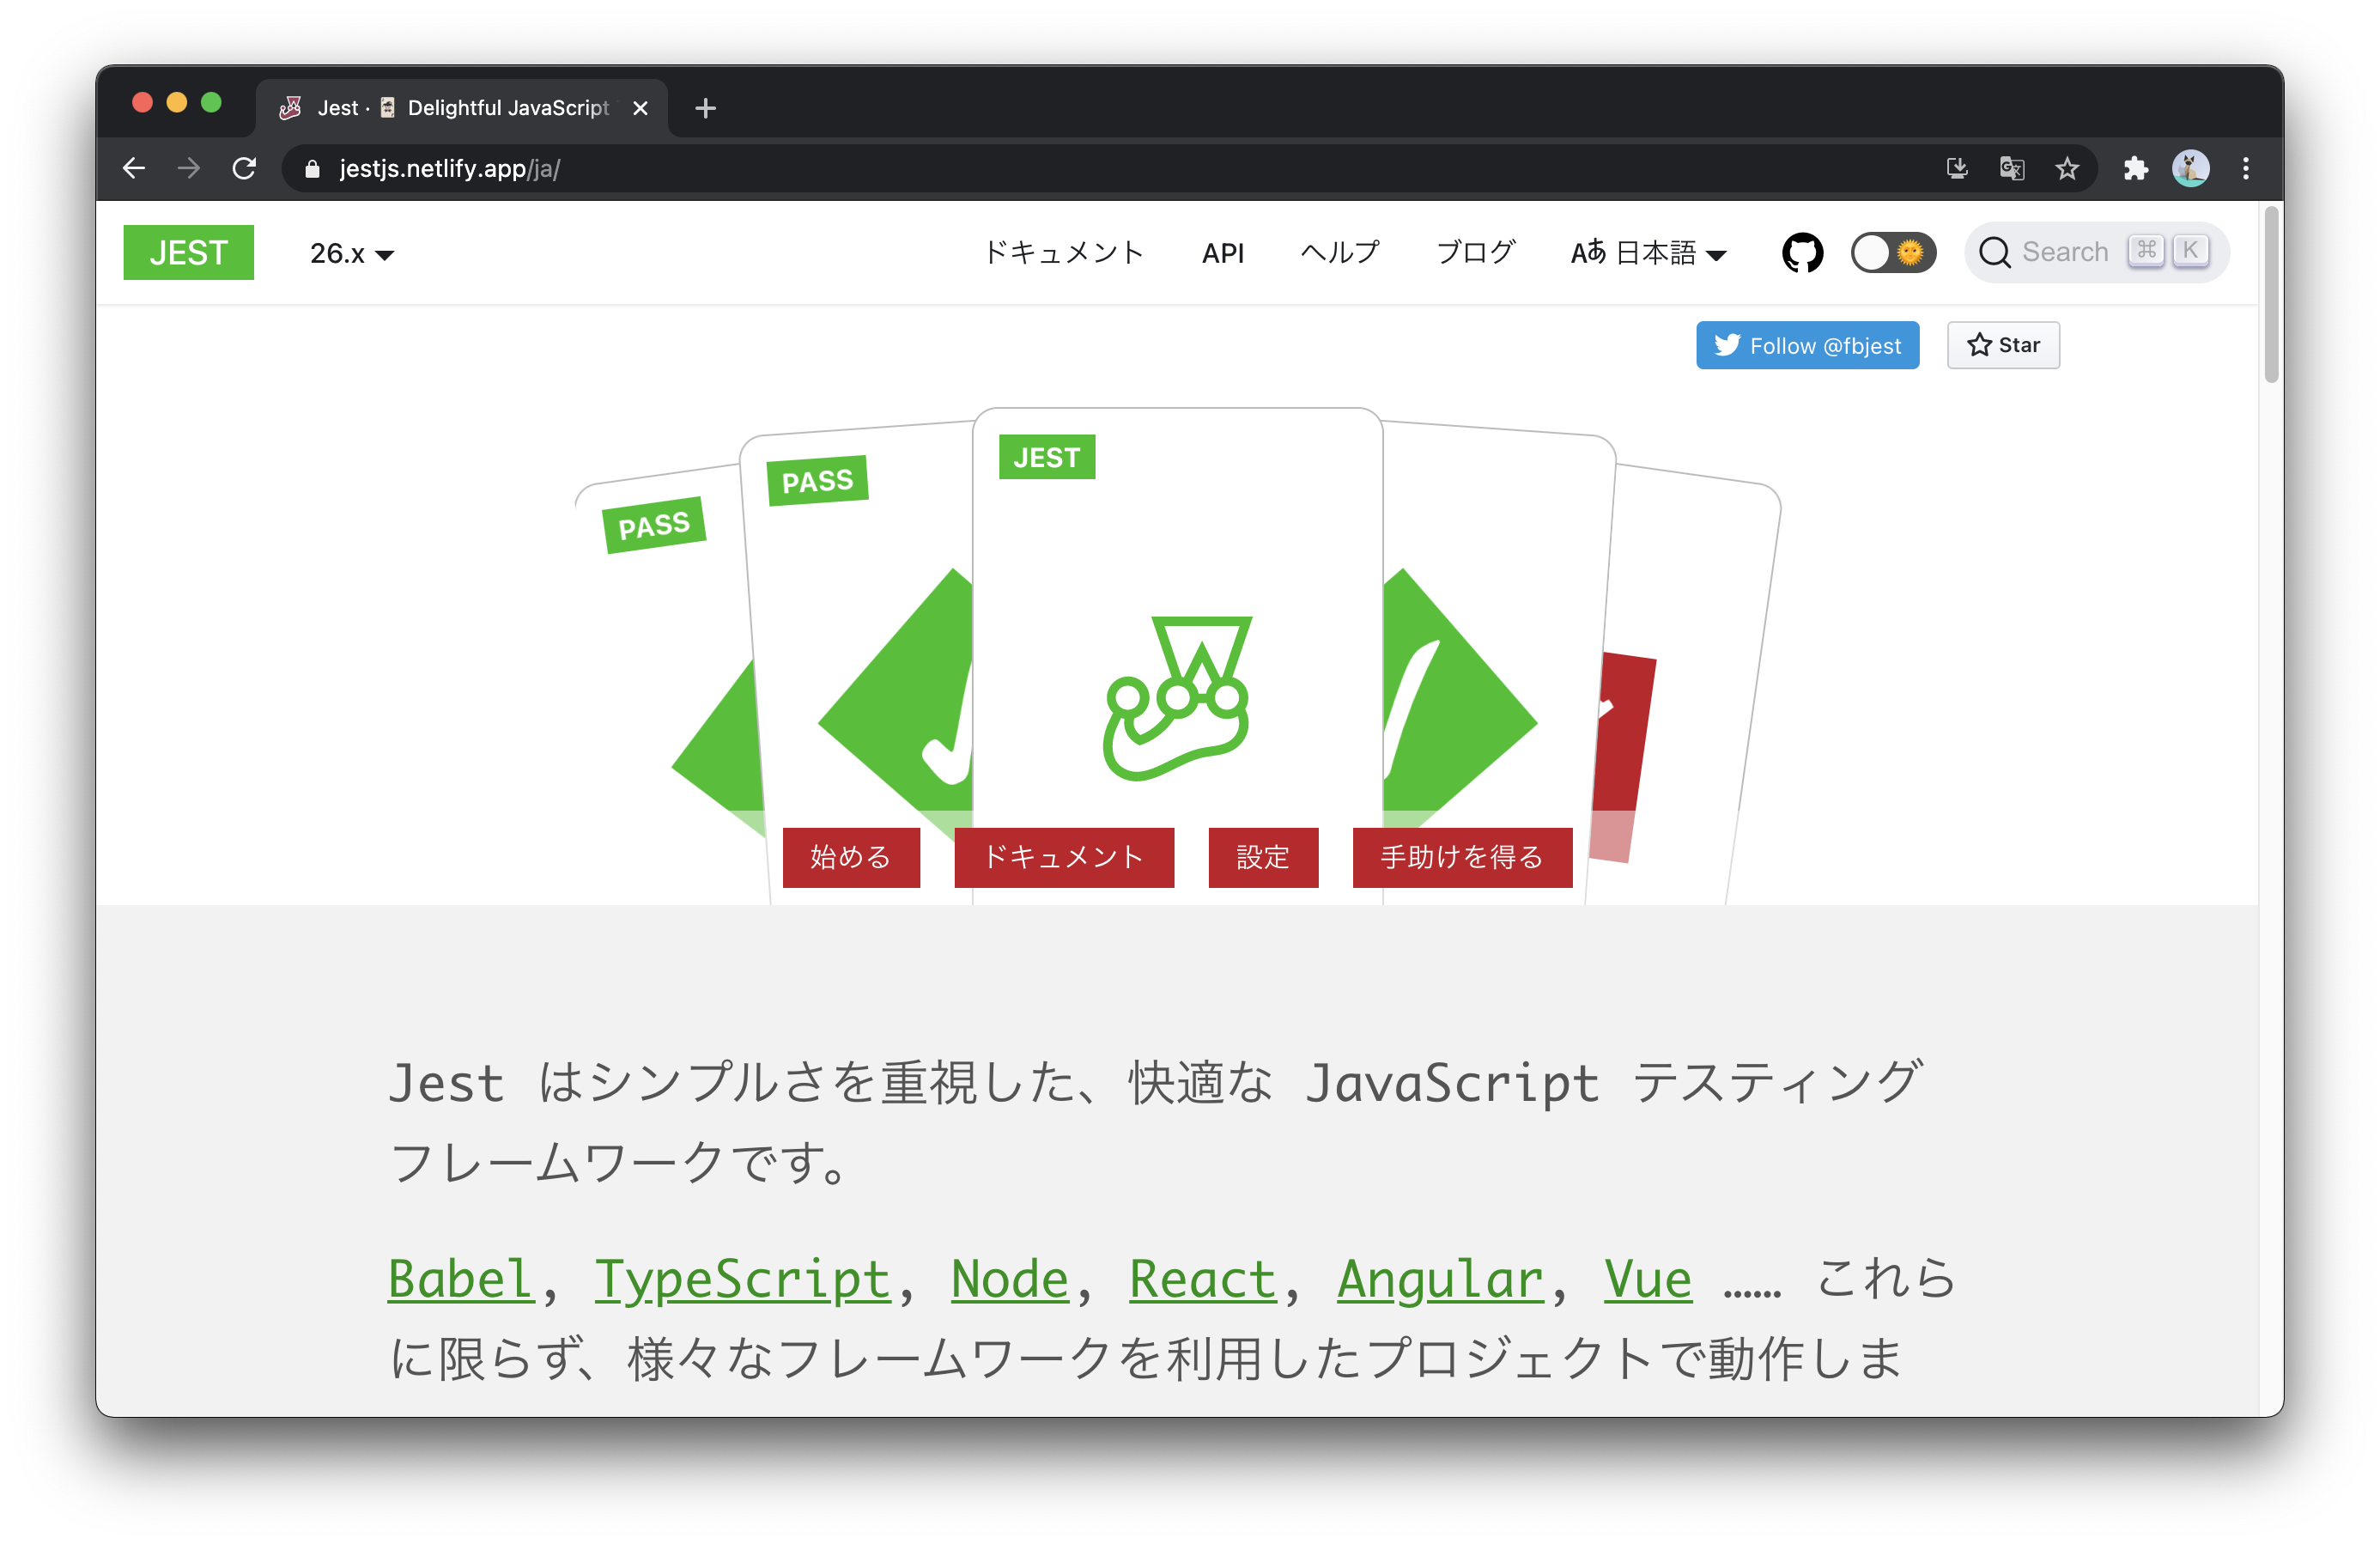 Jest&#39;s website front page in Japanese